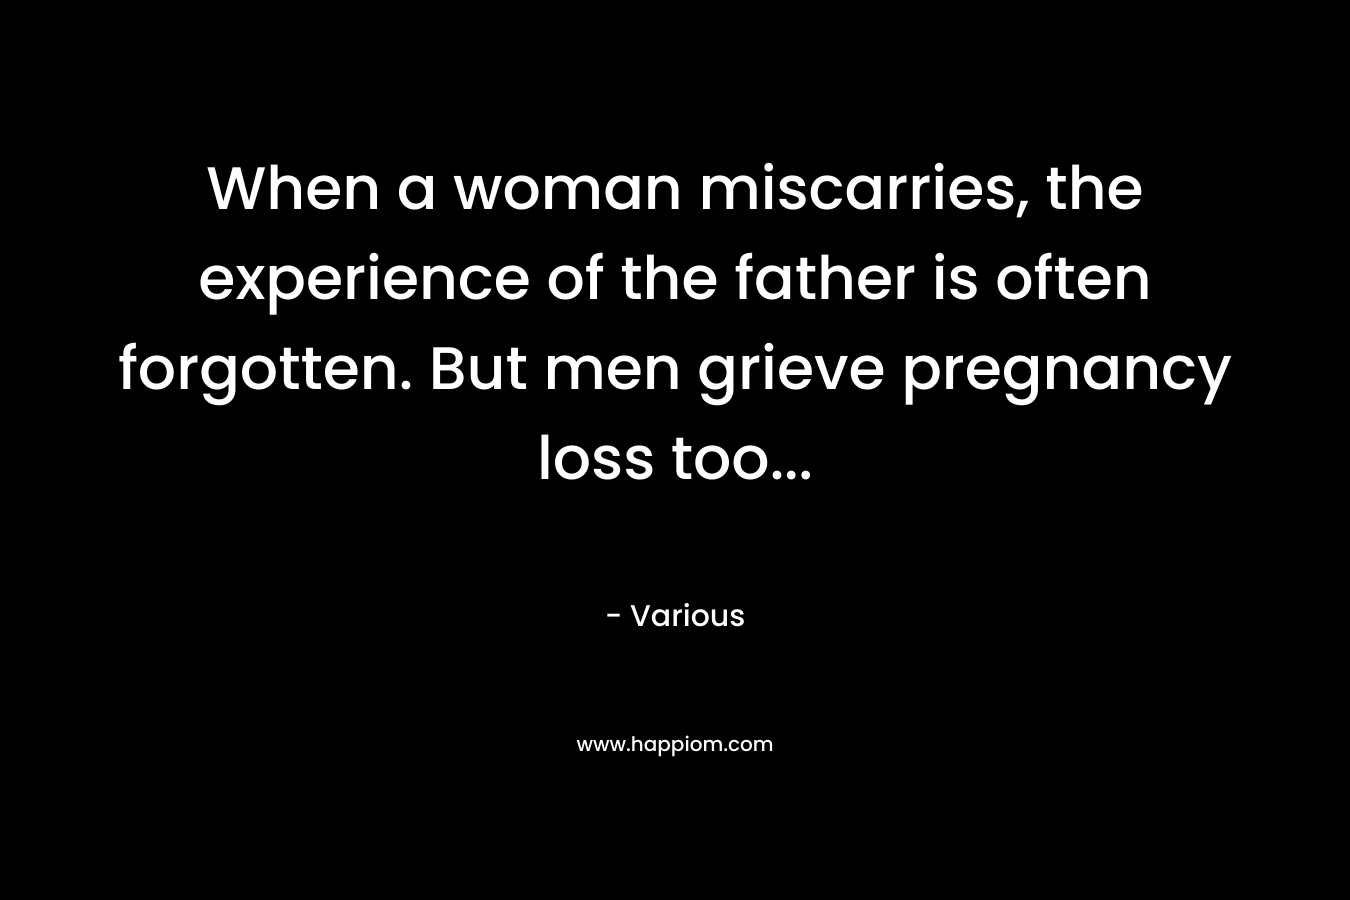 When a woman miscarries, the experience of the father is often forgotten. But men grieve pregnancy loss too… – Various